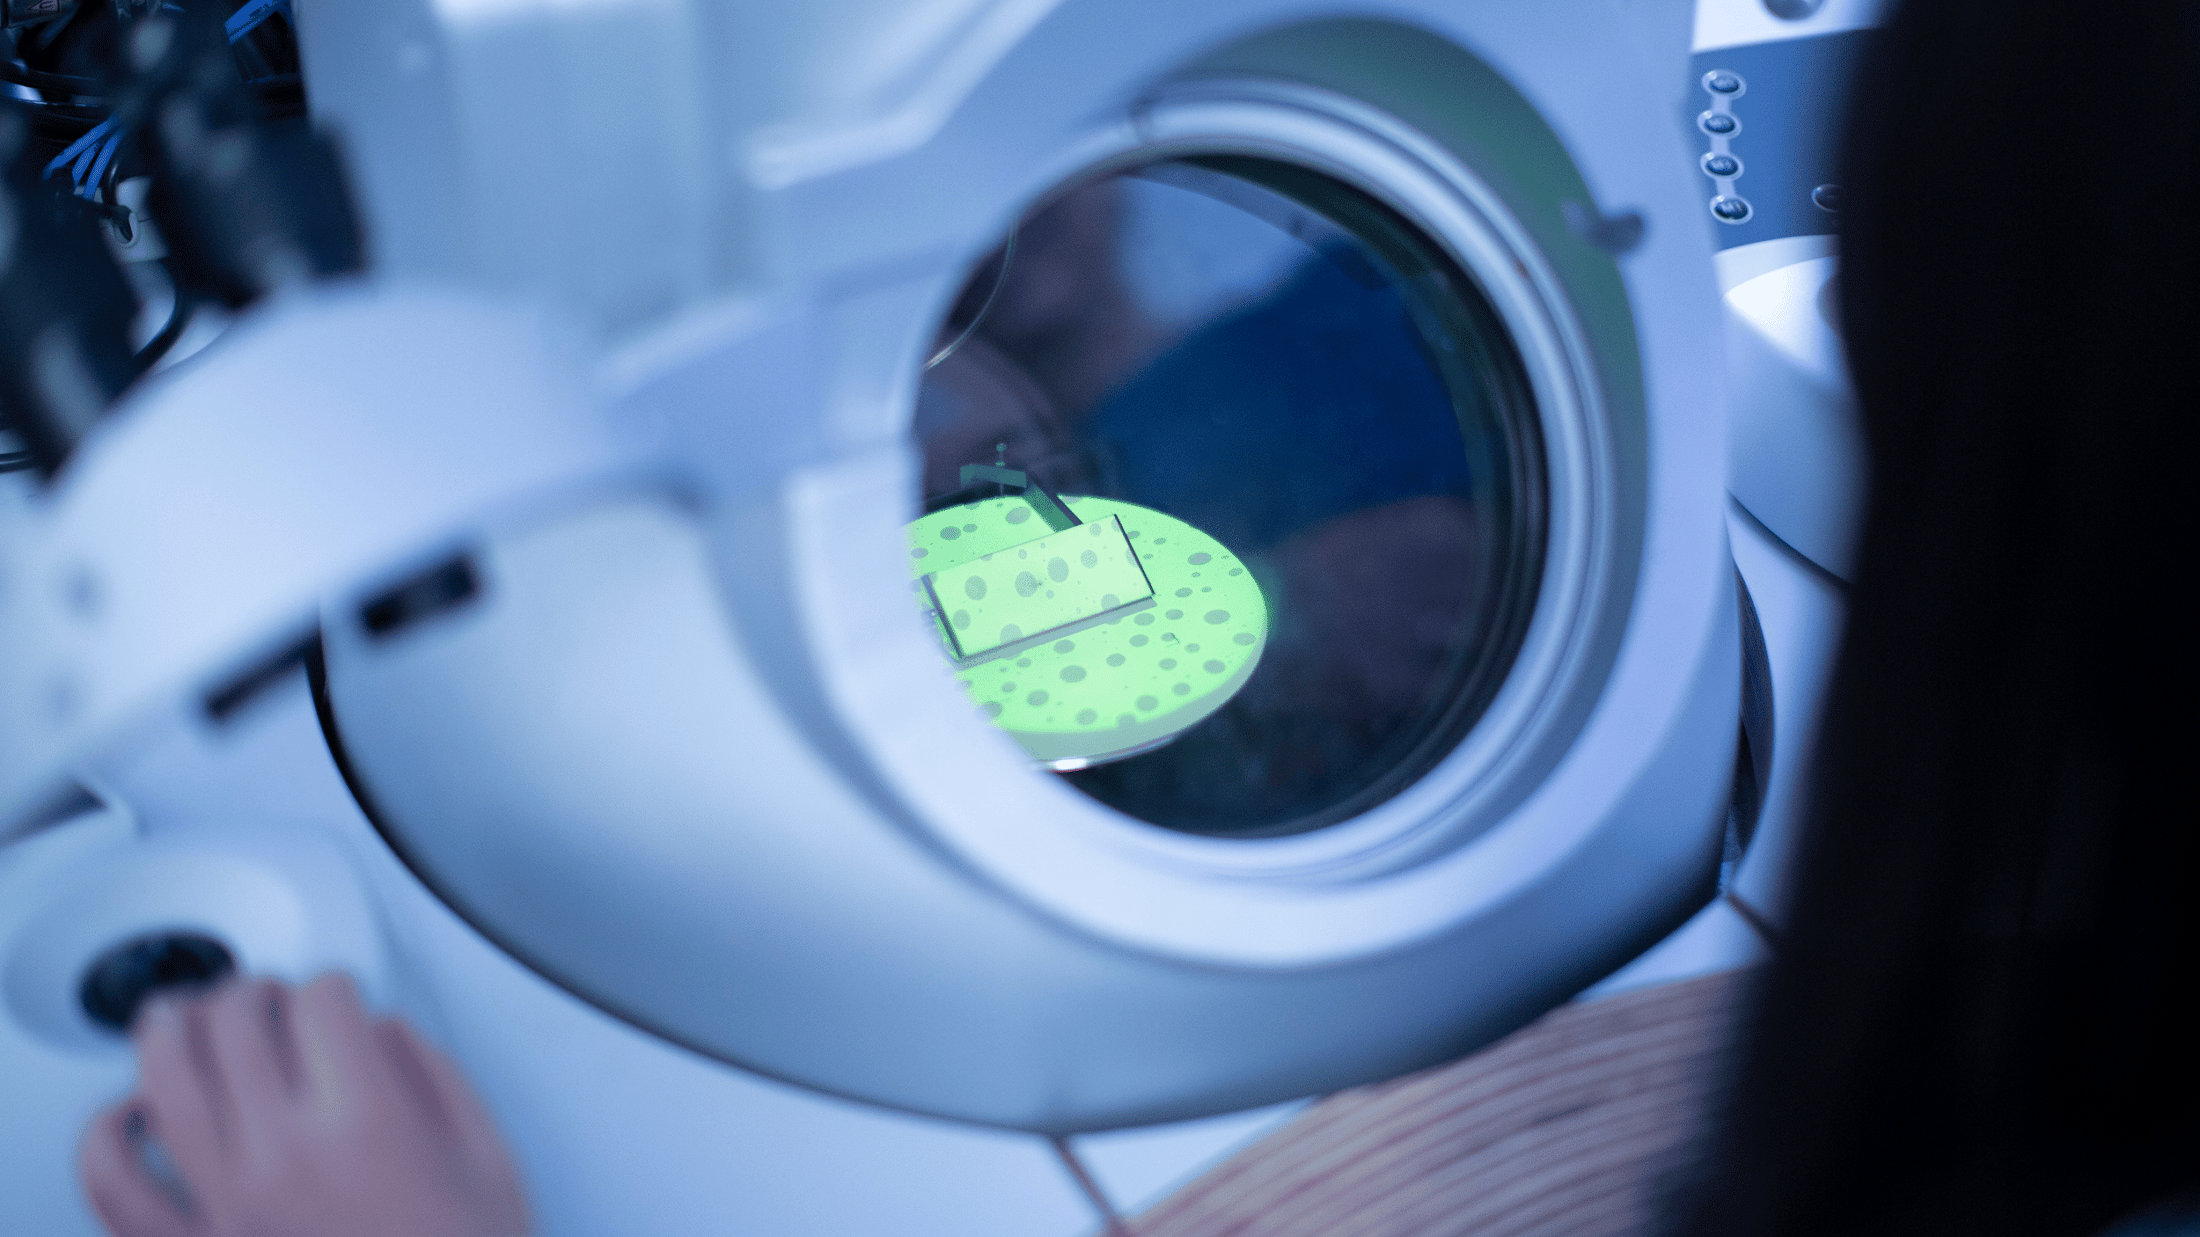 Close up of an electron microscope in use, a white machine with a circular view window looking in to a plate holding a specimen in a green light.